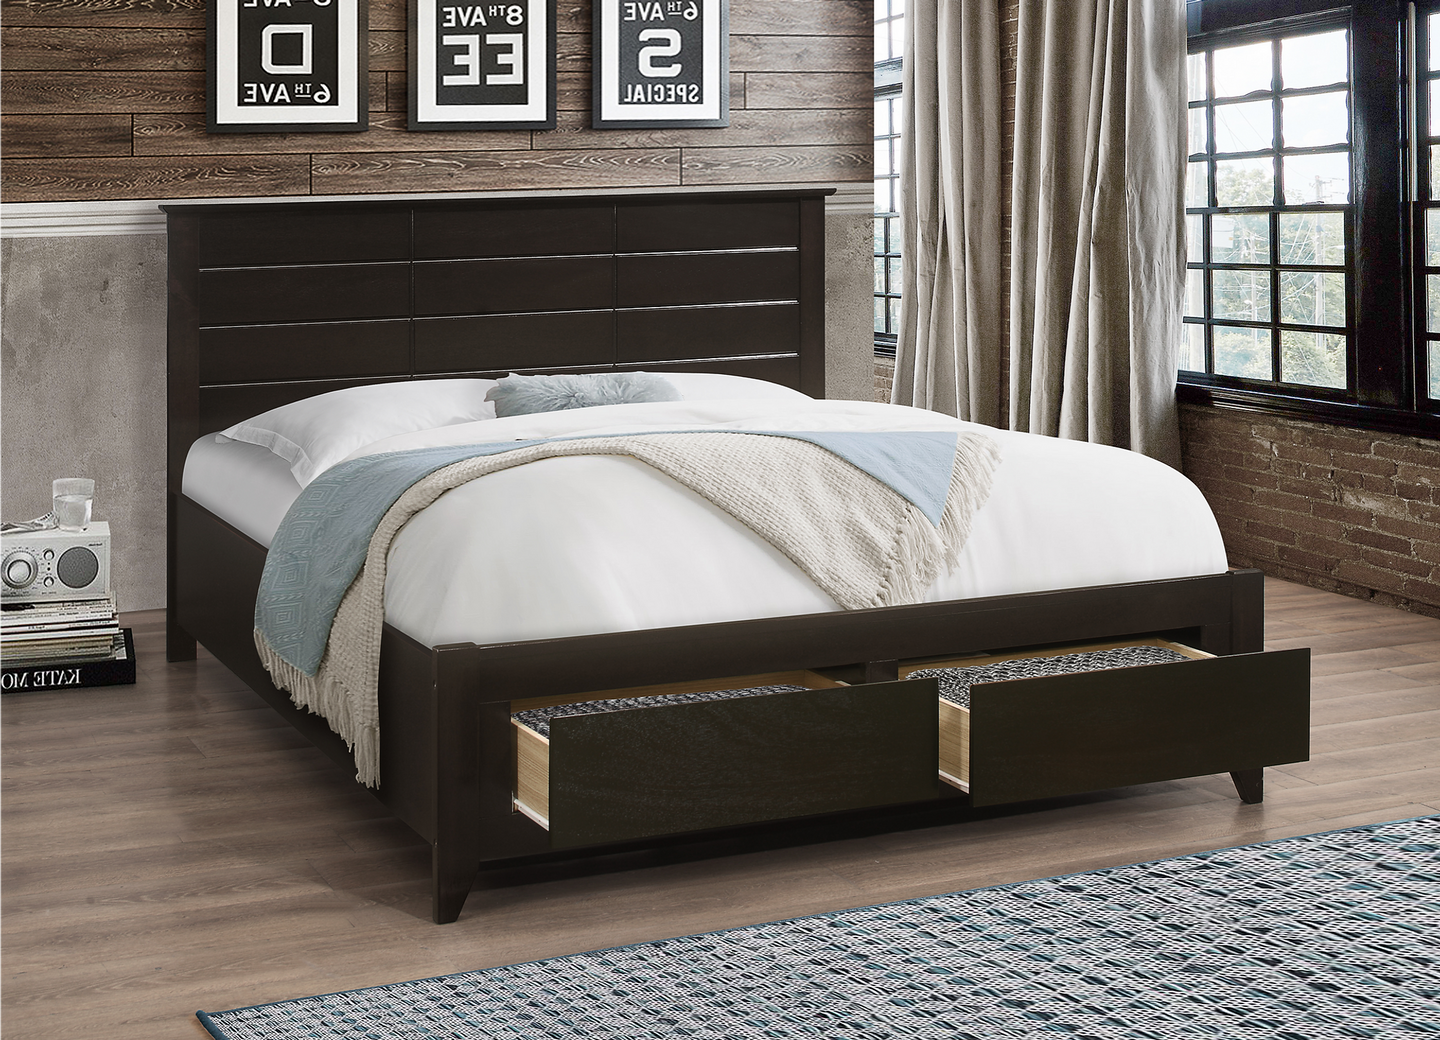 IF-421 Wooden Platform bed With Drawers